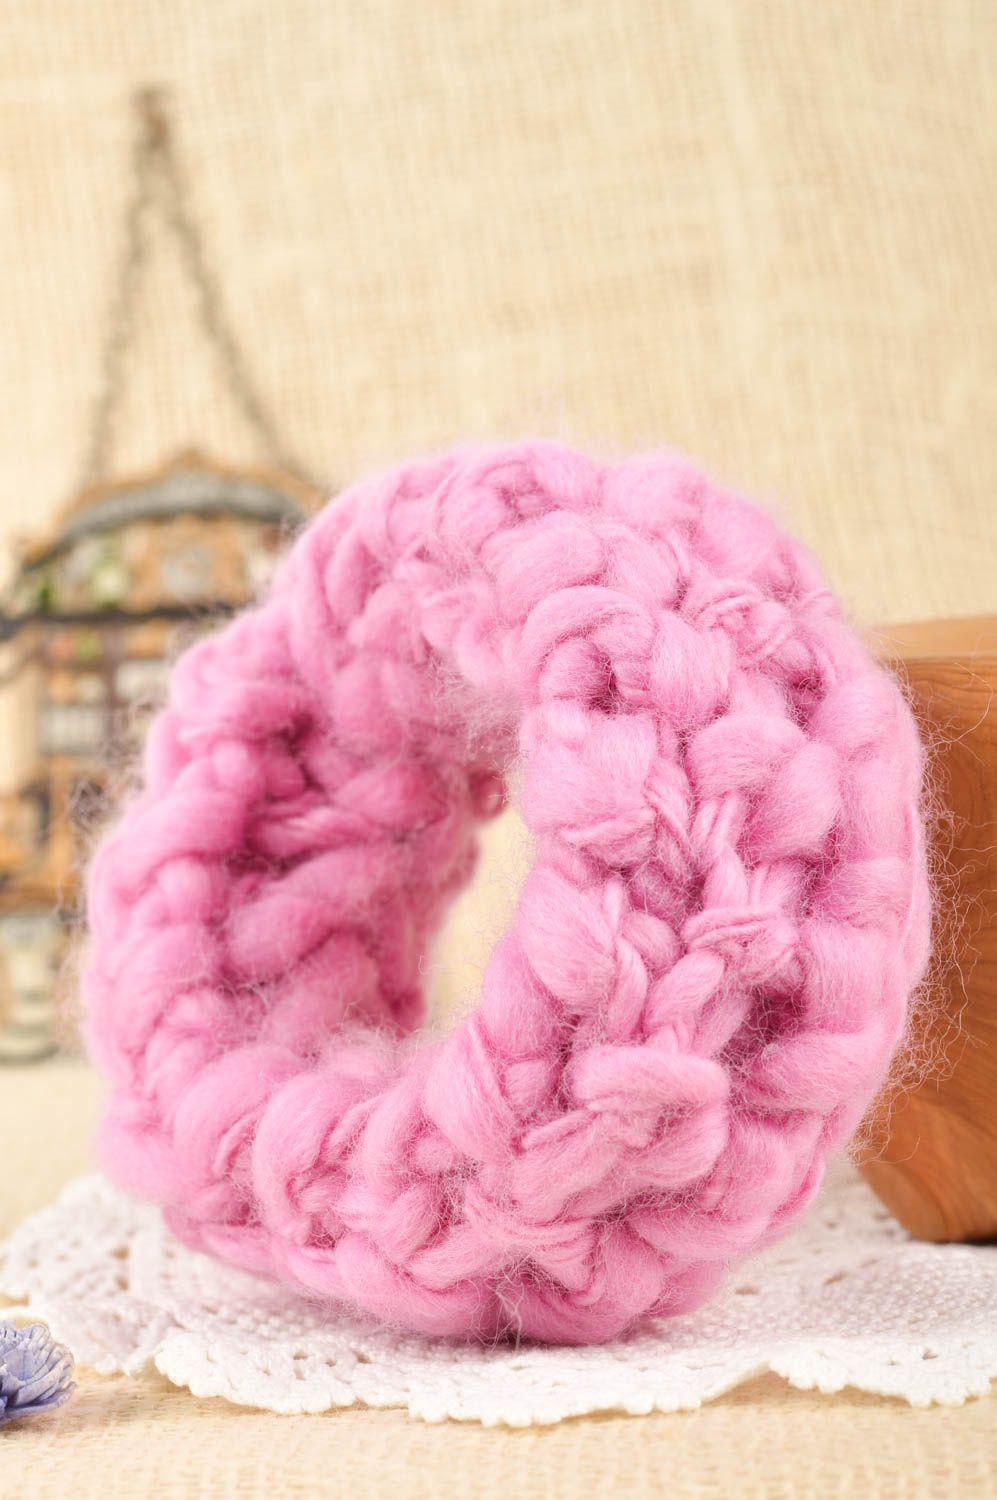 Stylish handmade knitted bracelet artisan jewelry designs gifts for her photo 1